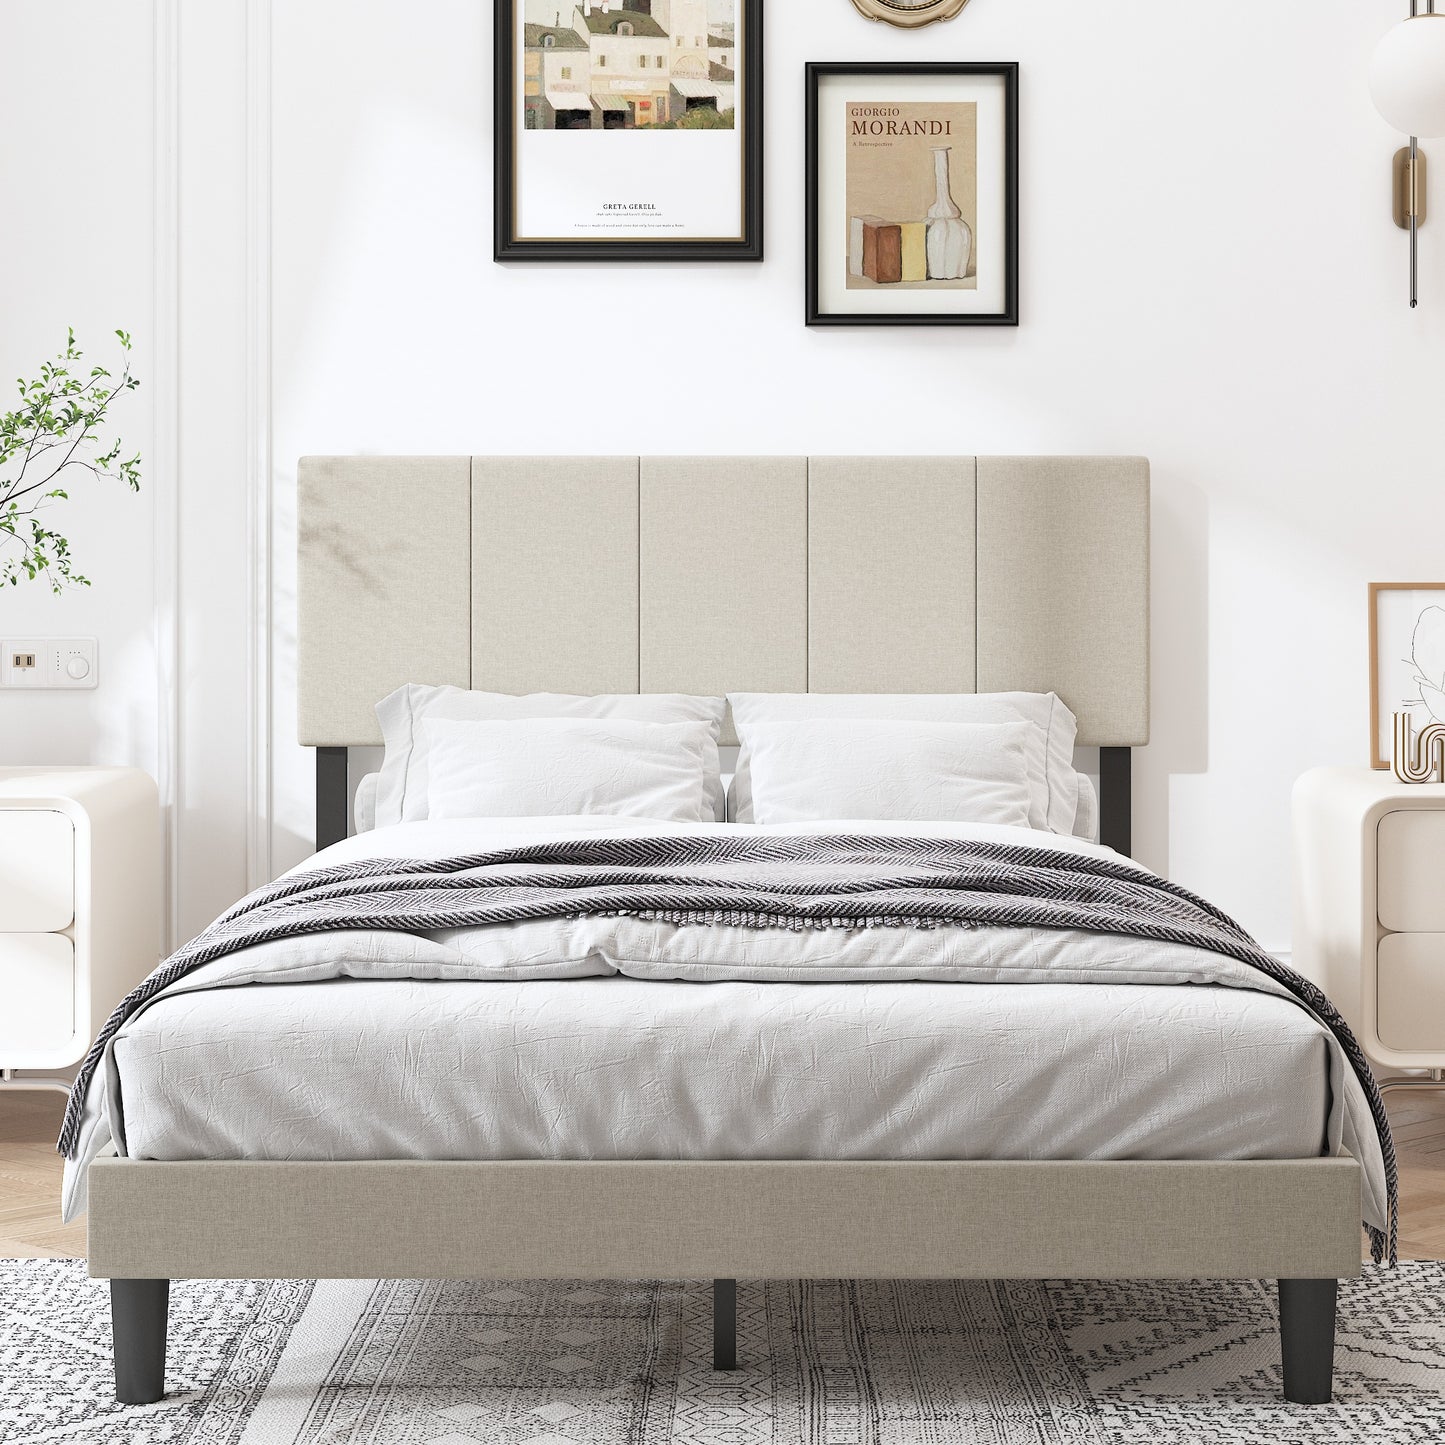 SYNGAR Full Size Platform Bed Frame with Fabric Upholstered Headboard, Sturdy Metal Frame and Strong Wooden Slats, No Box Spring Needed, Beige